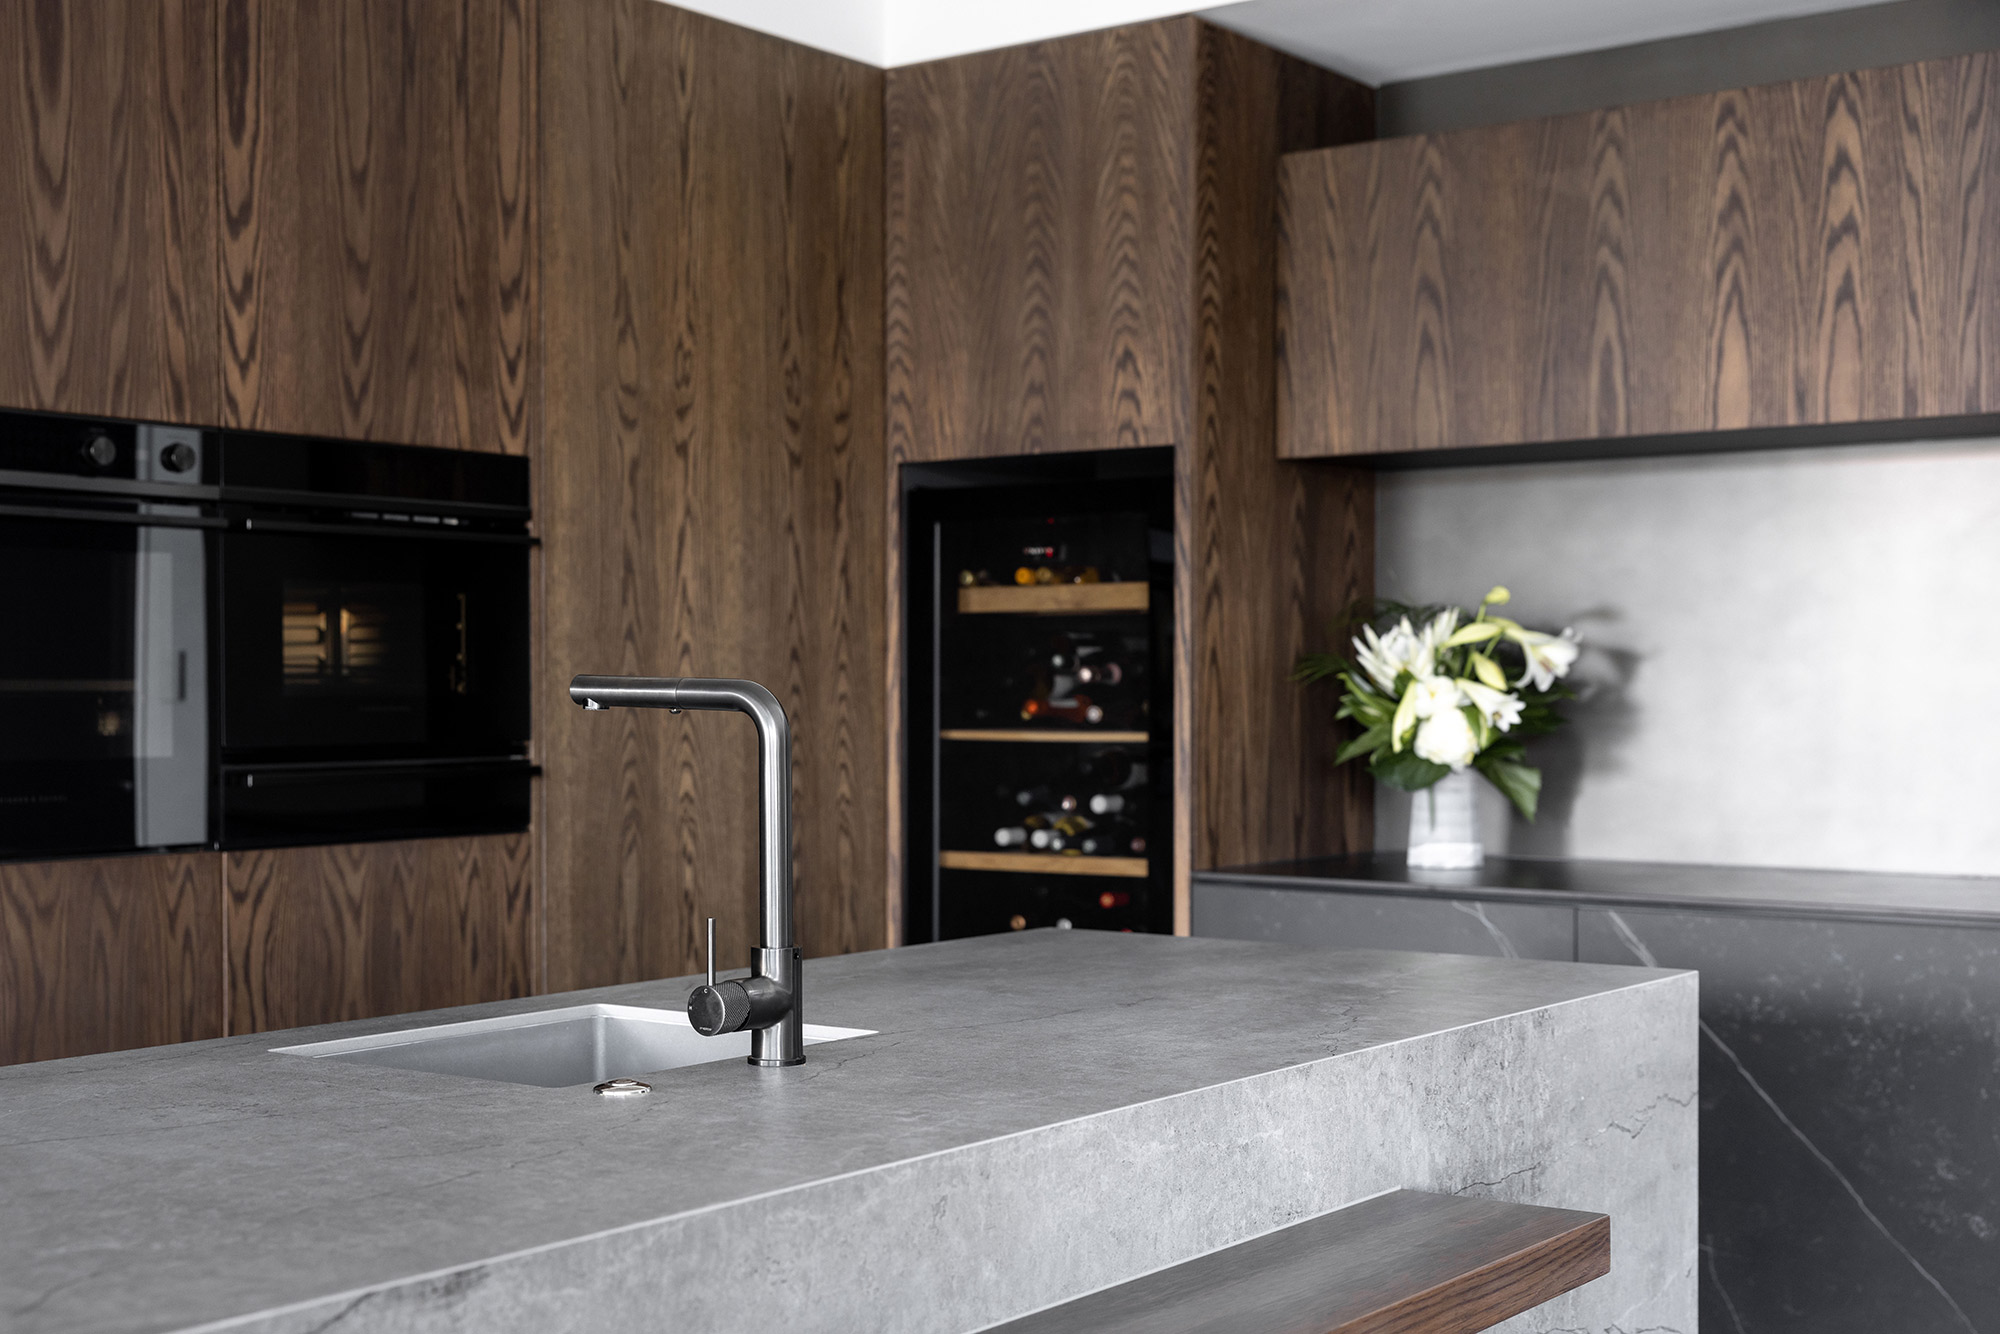 Image of Gulf Harbour 16 in Two Dekton colours to match wood in kitchens and bathrooms - Cosentino